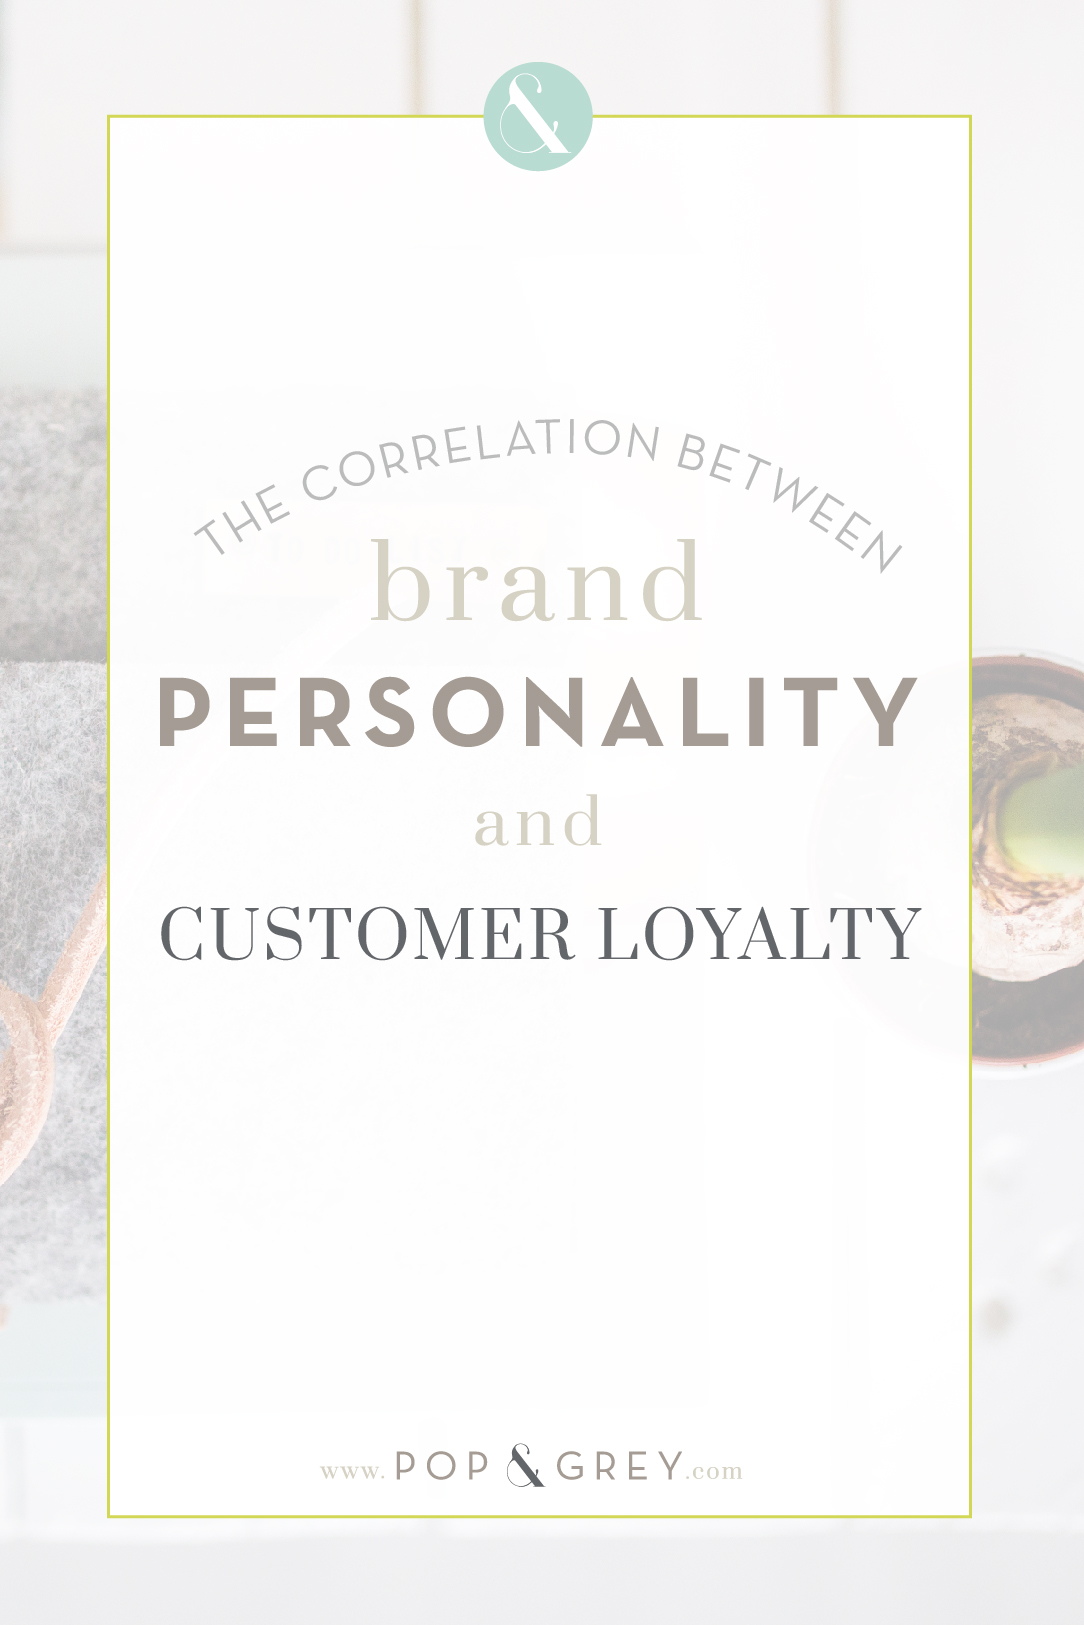 Correlation between brand personality and customer loyalty by Pop and Grey